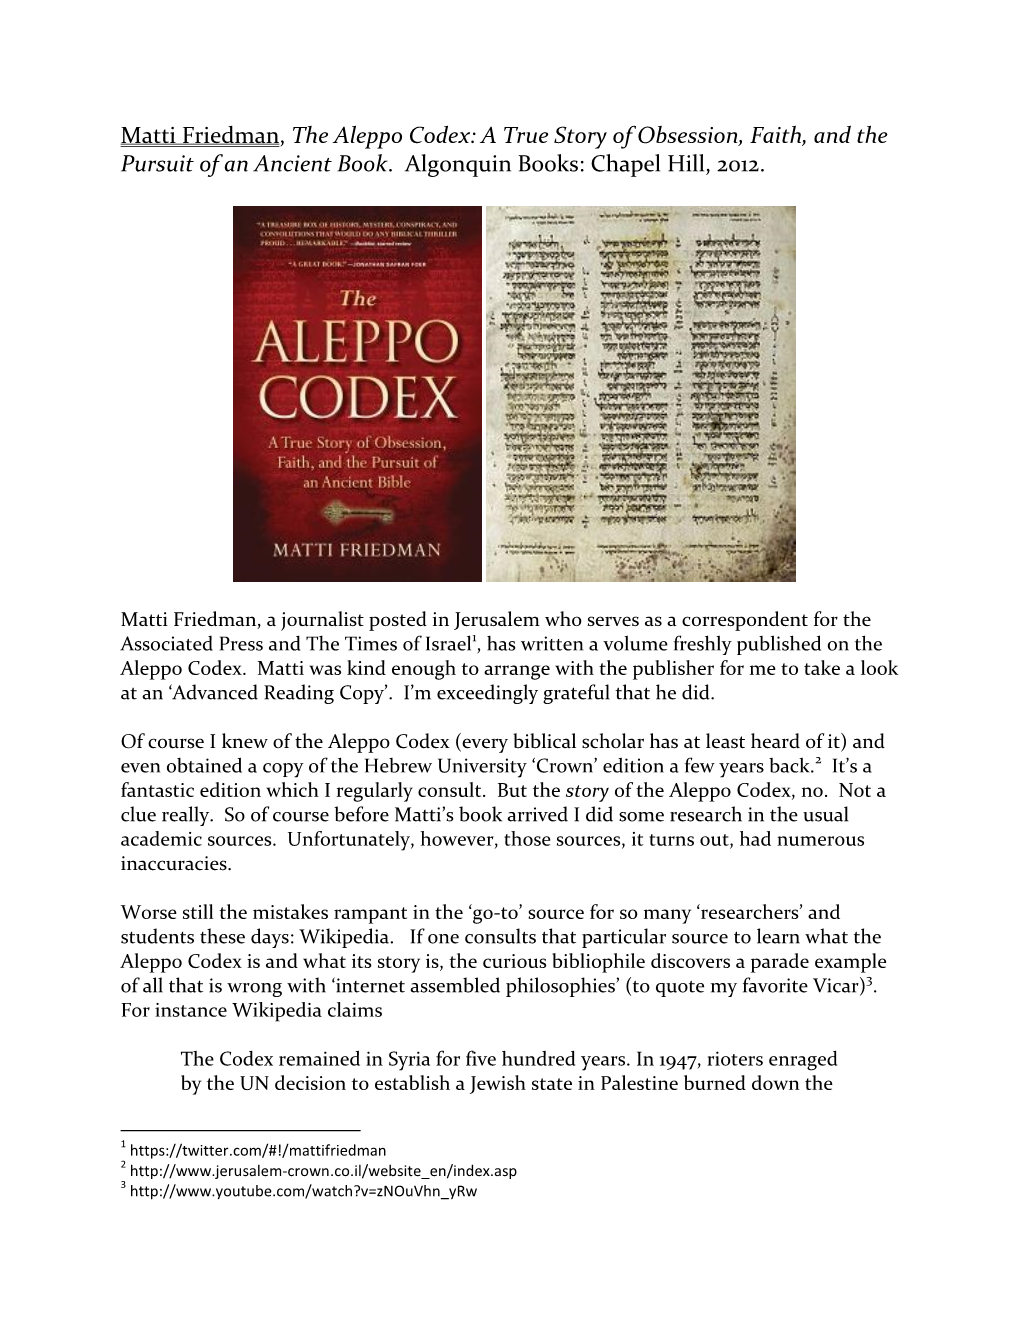 Matti Friedman, the Aleppo Codex: a True Story of Obsession, Faith, and the Pursuit of an Ancient Book